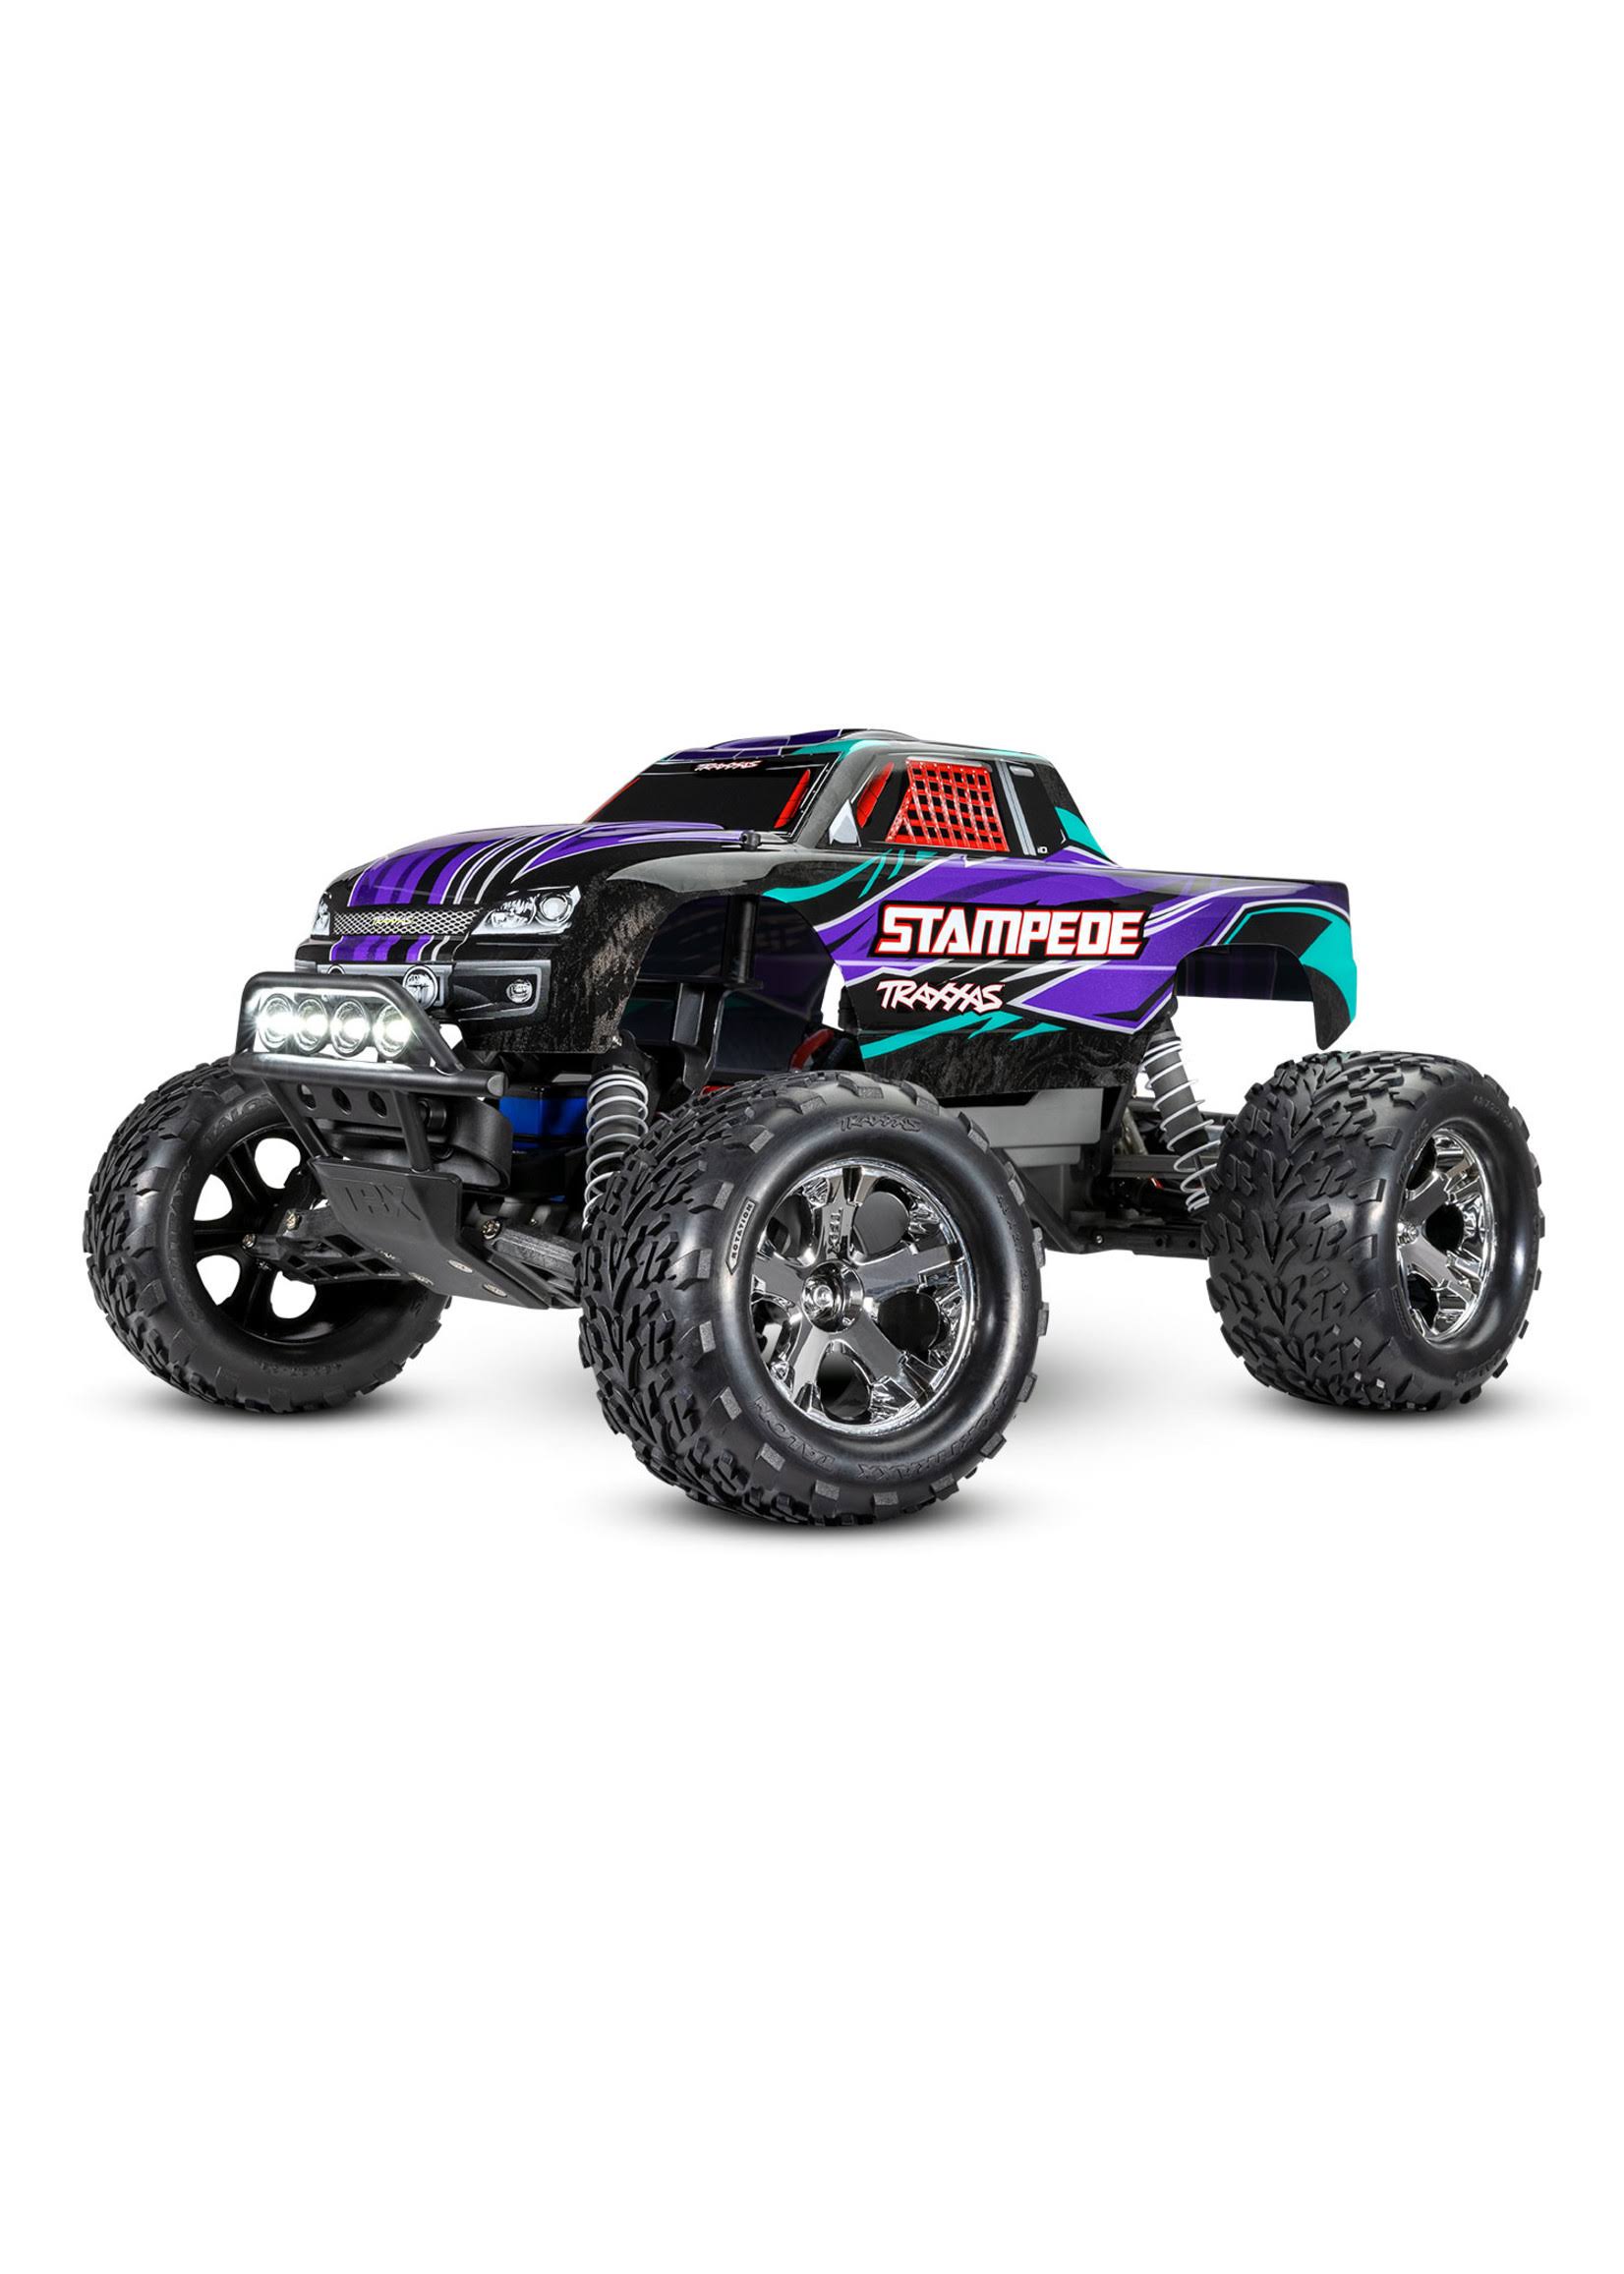 Traxxas 1/10 Stampede 2WD RTR Monster Truck with Lights - Purple